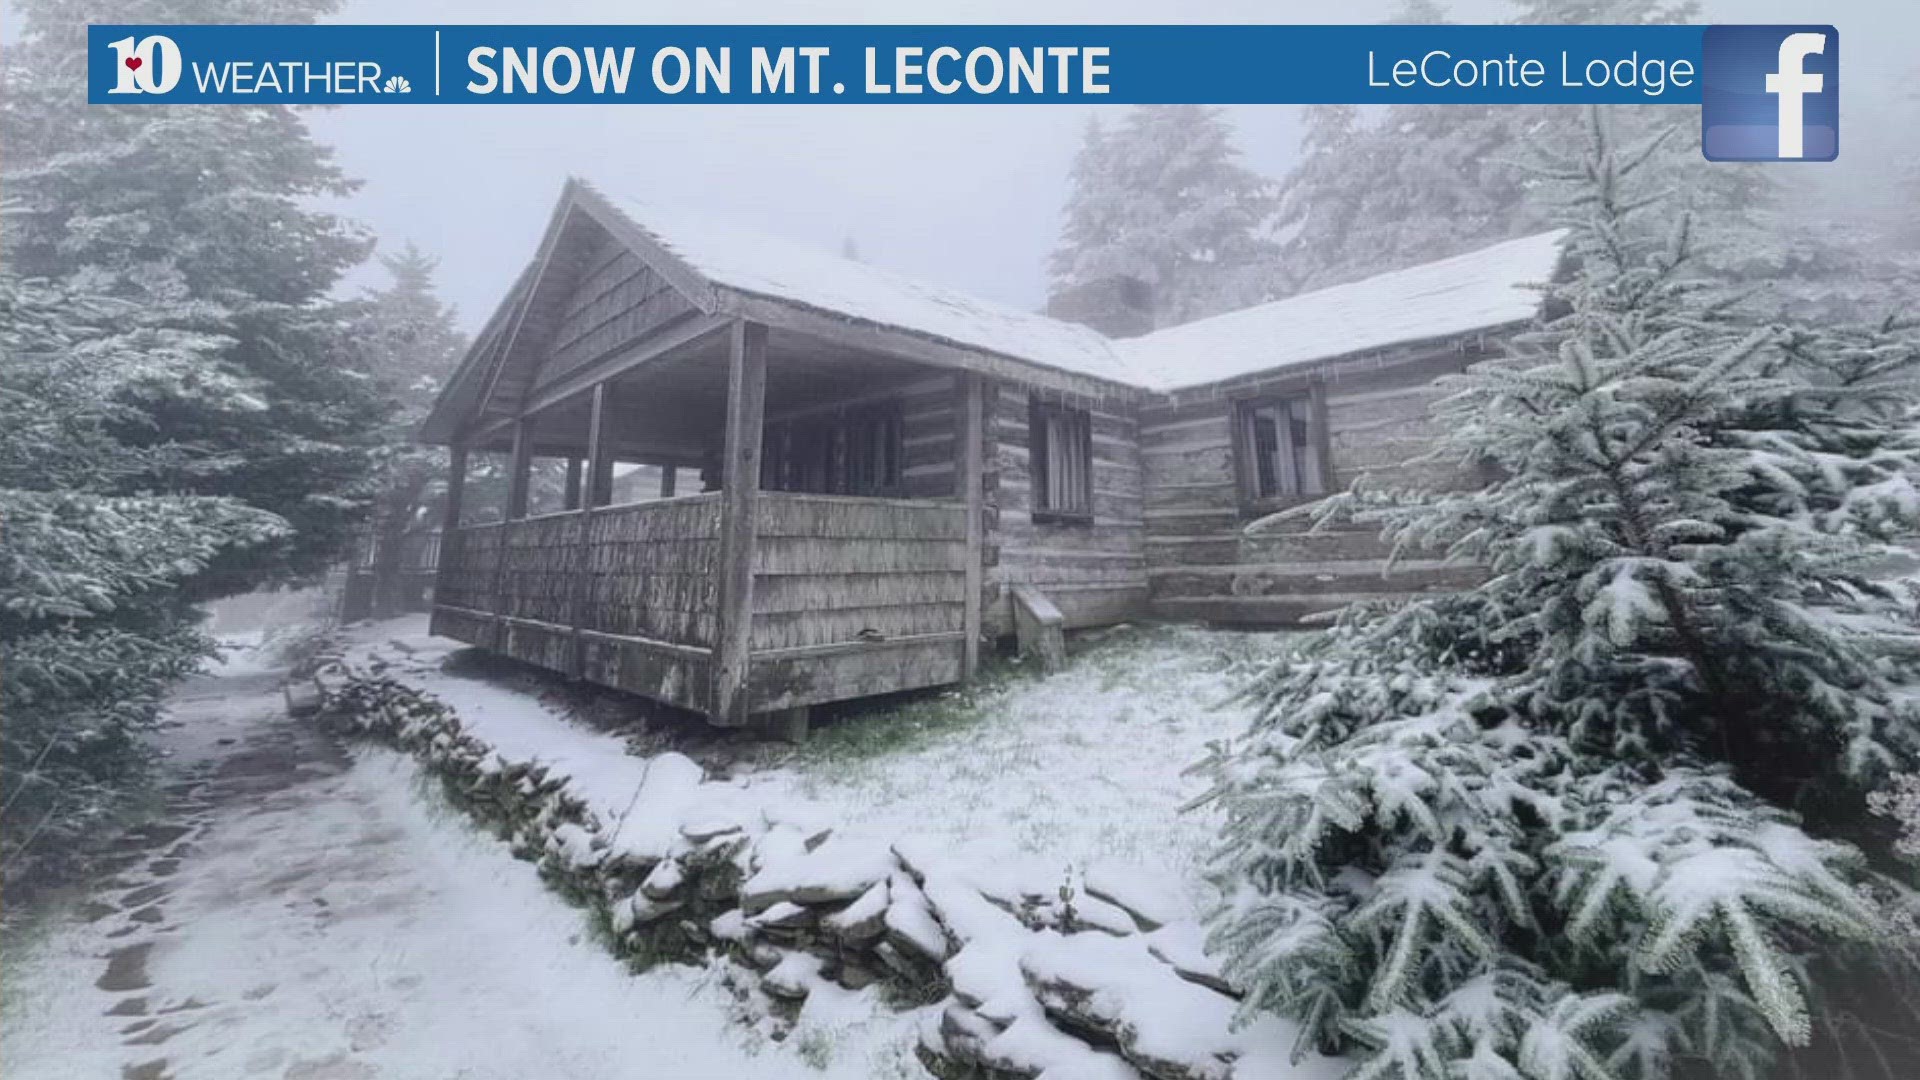 The LeConte Lodge saw four inches of ground accumulation.